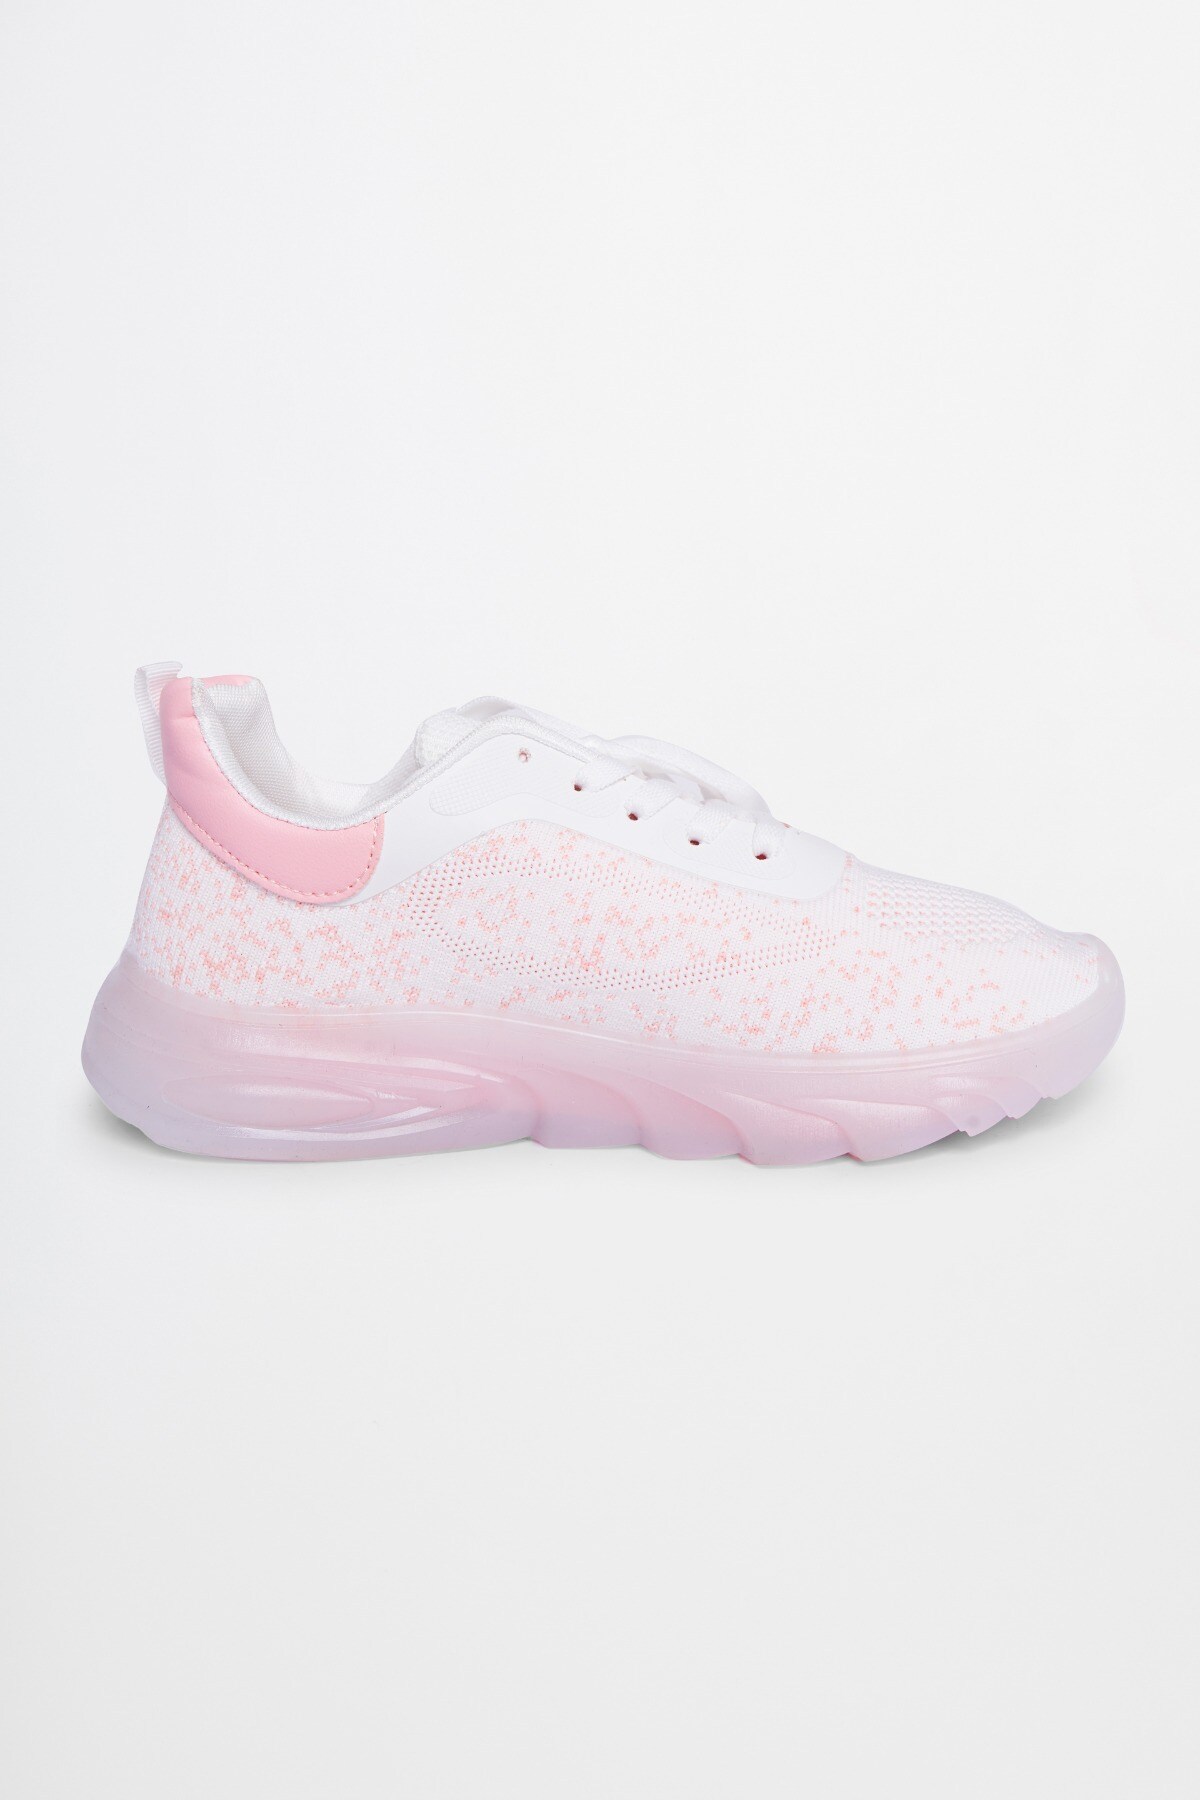 2 - Pink Shoes, image 4